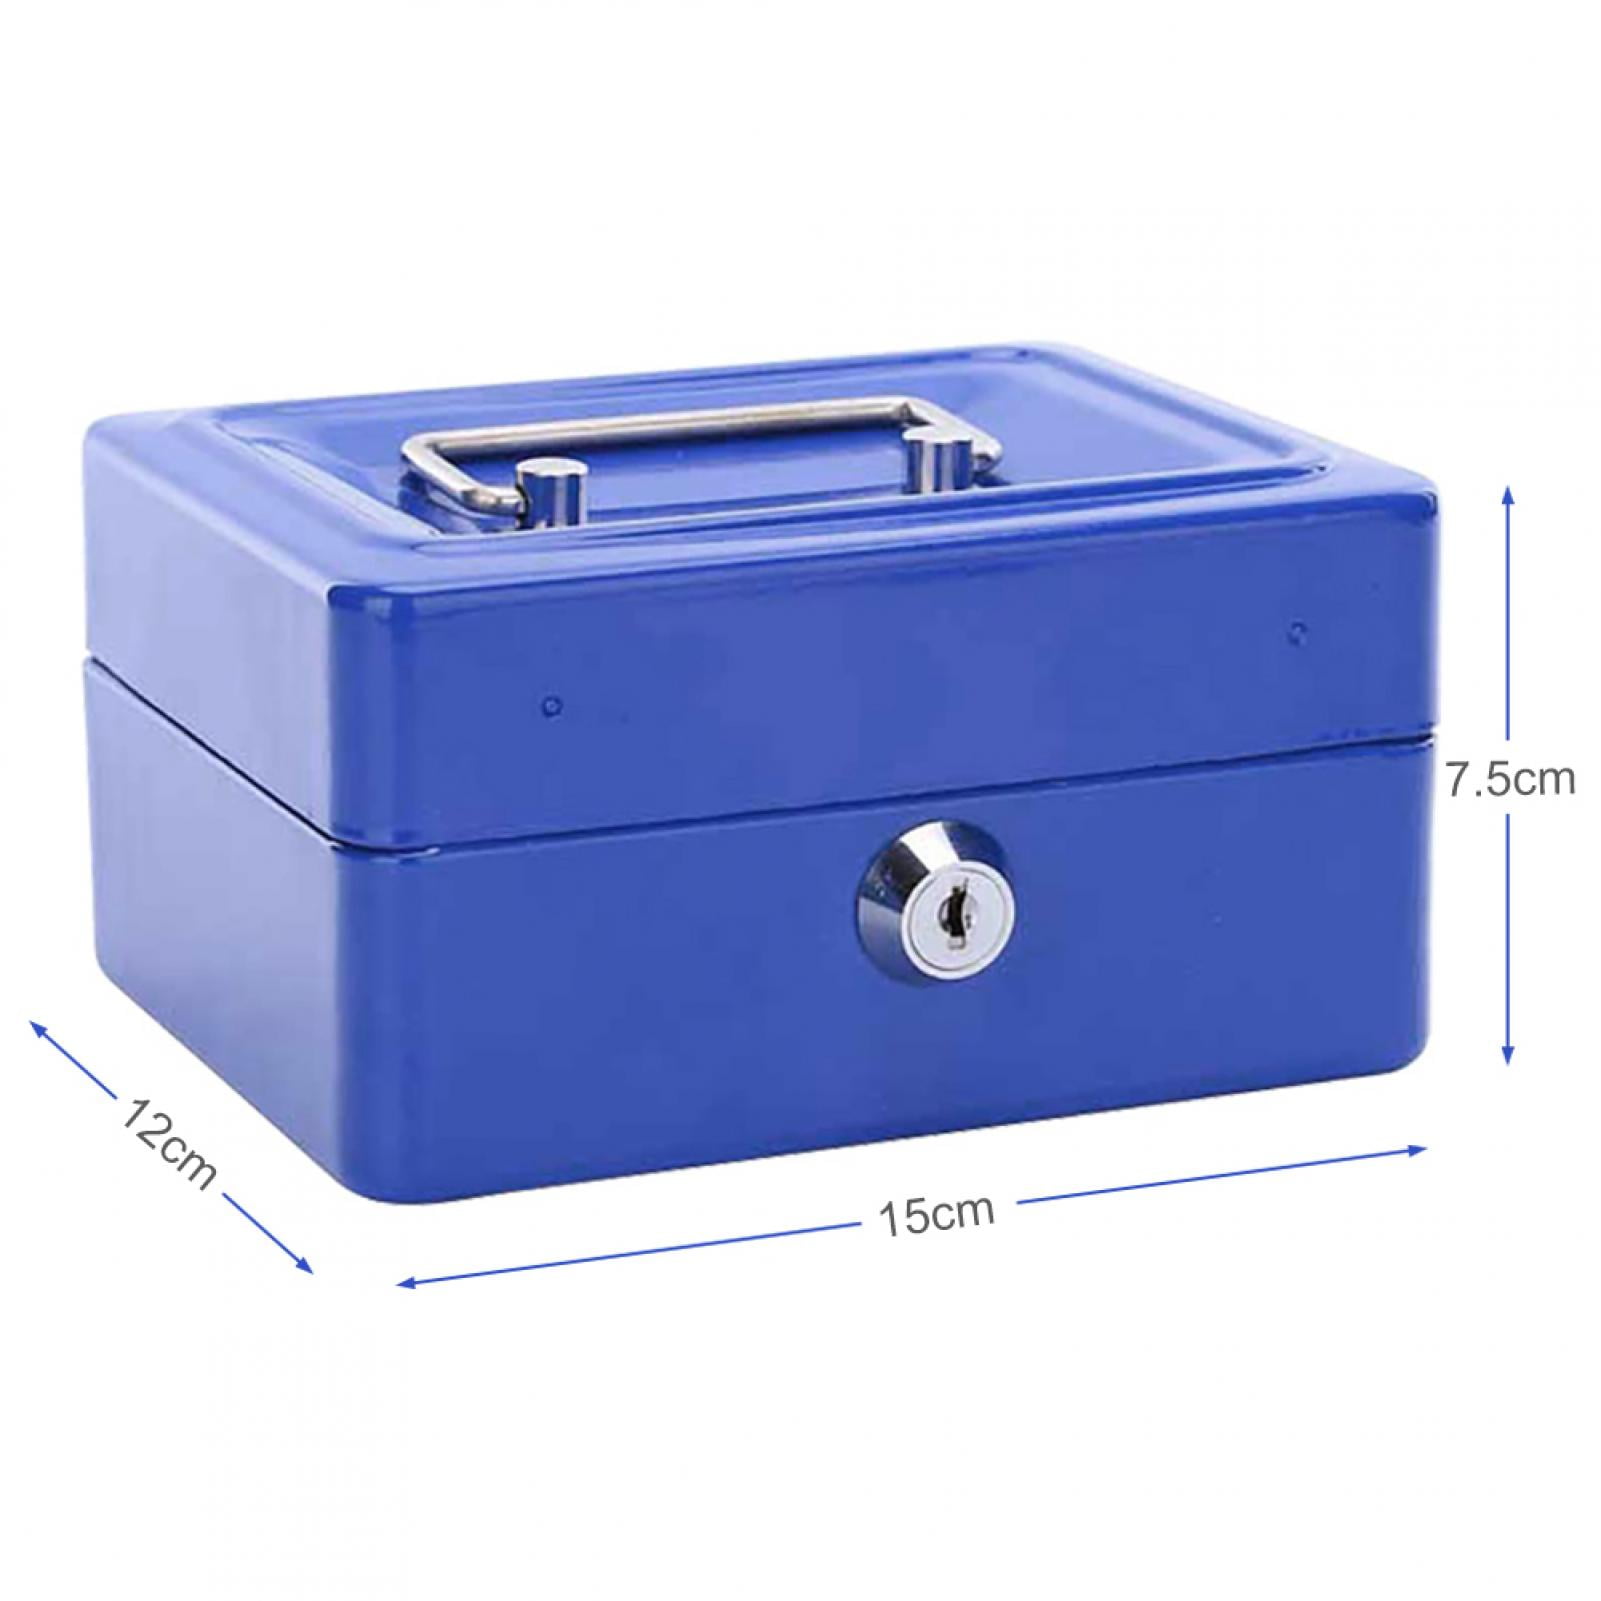 Doact 15cm Steel Small Jewelry Cash Money Box Security Lock Type Lockable Safe Boxes